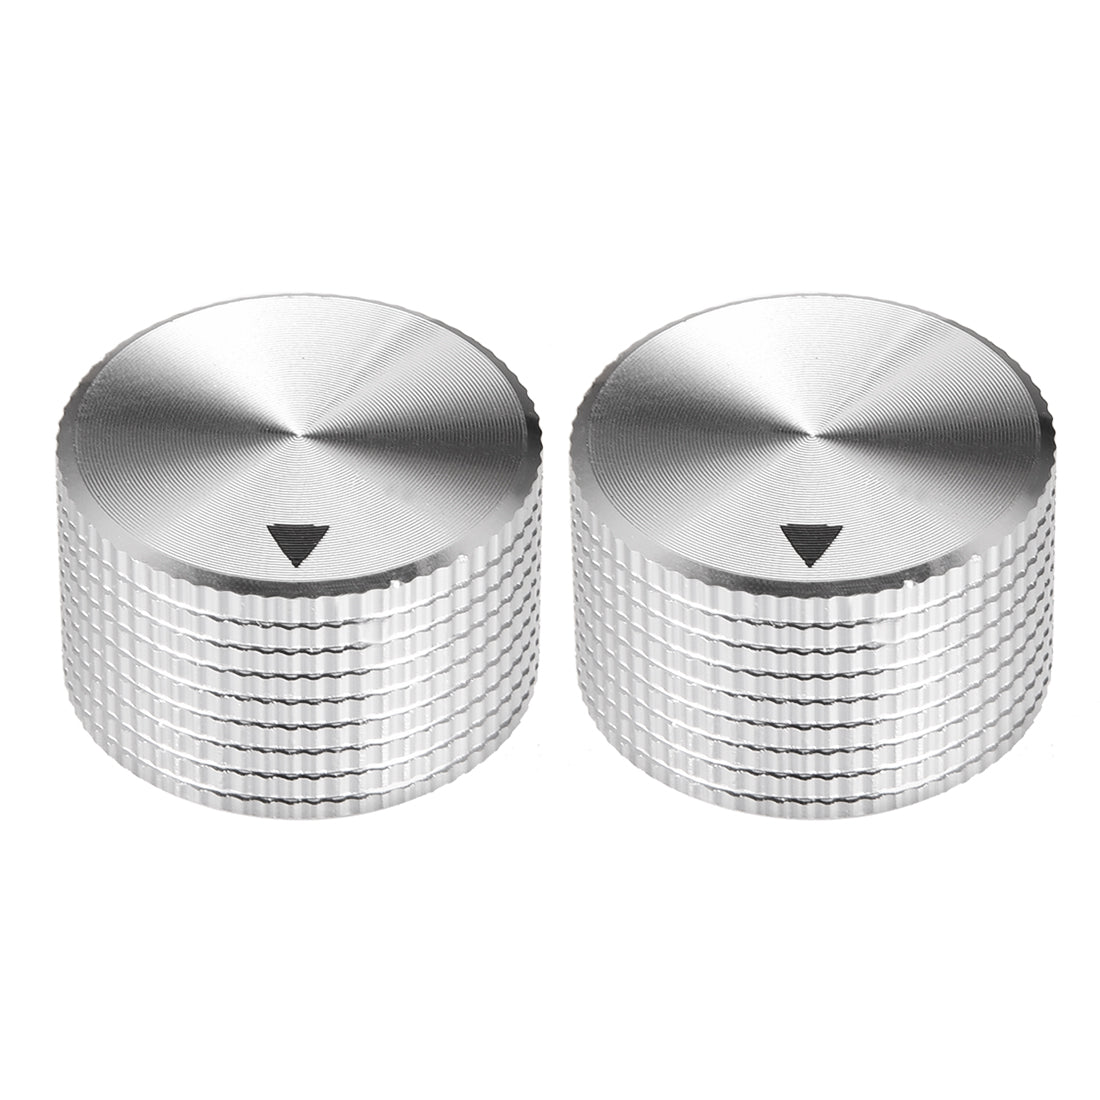 uxcell Uxcell Stereo Knob, 25*6*15.5 mm Aluminium Volume Knob, Silver Textured Surface 2pcs